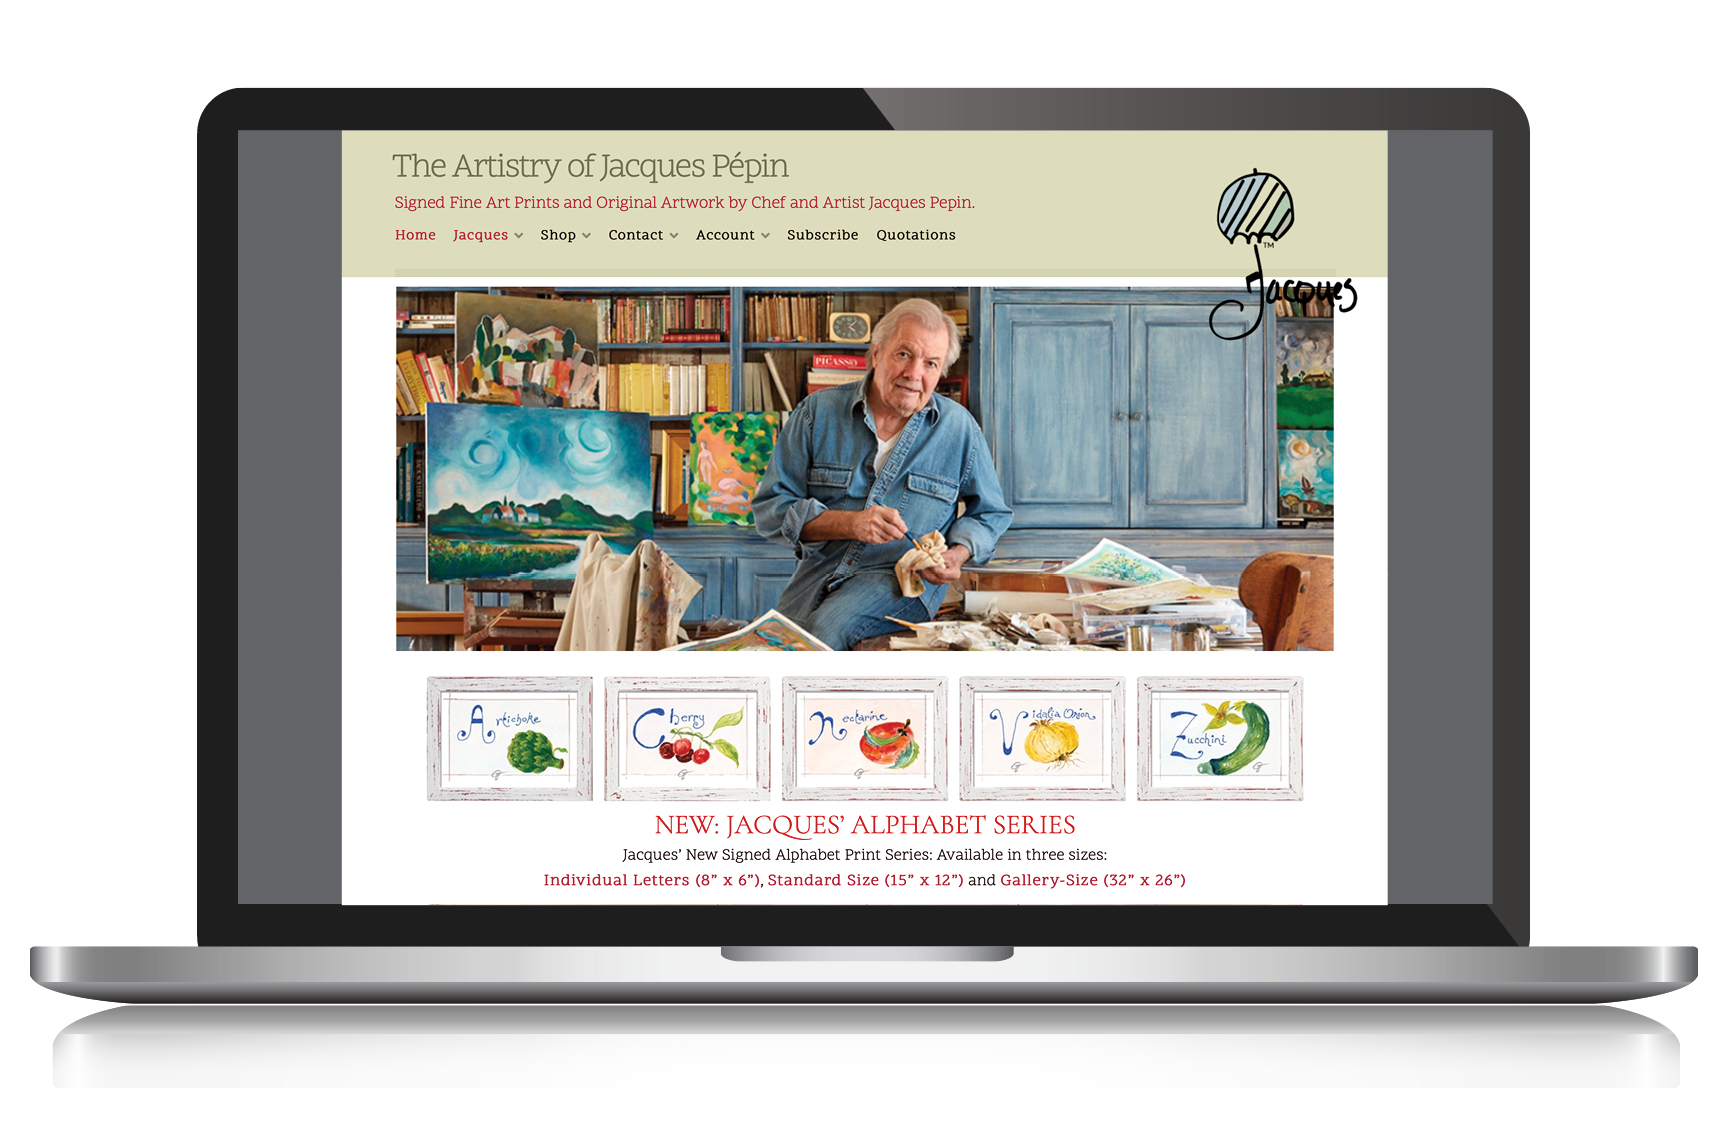 “The Artistry of Jacques Pepin” Granite Bay Design Website Design and Development